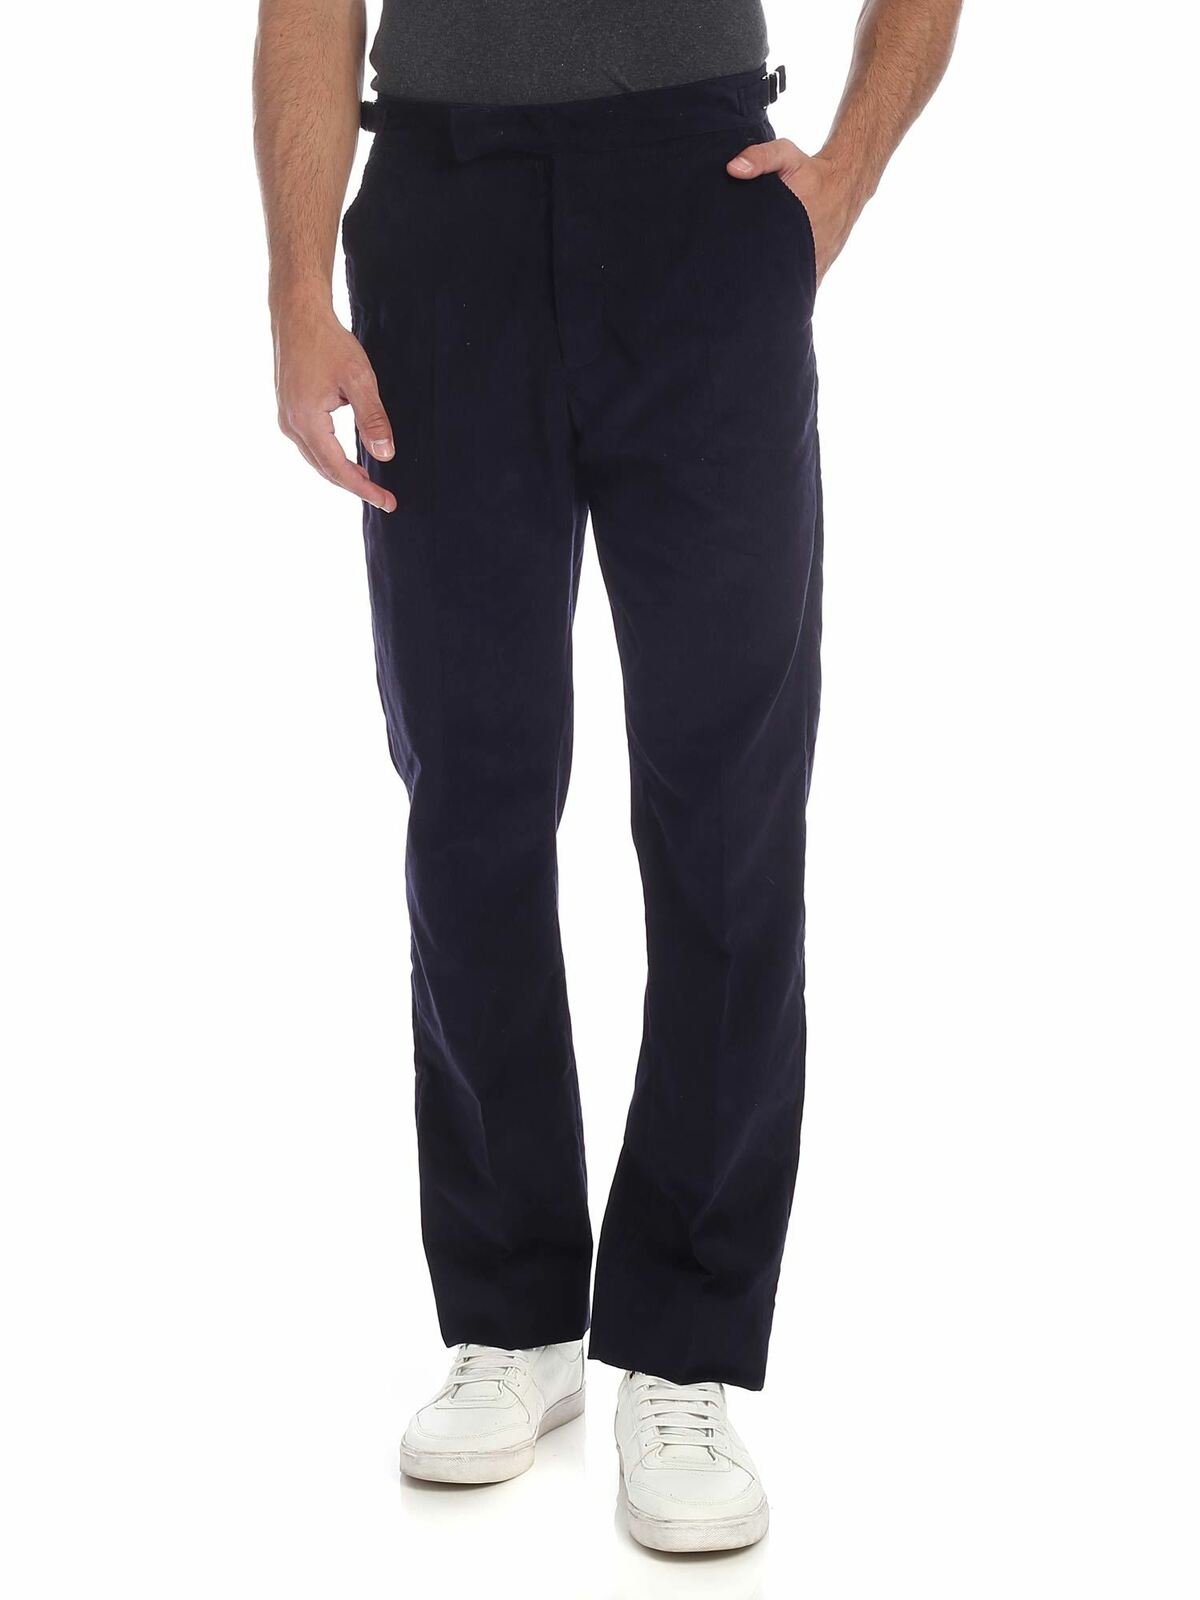 Vivienne Westwood Anglomania Blue Corduroy Trousers